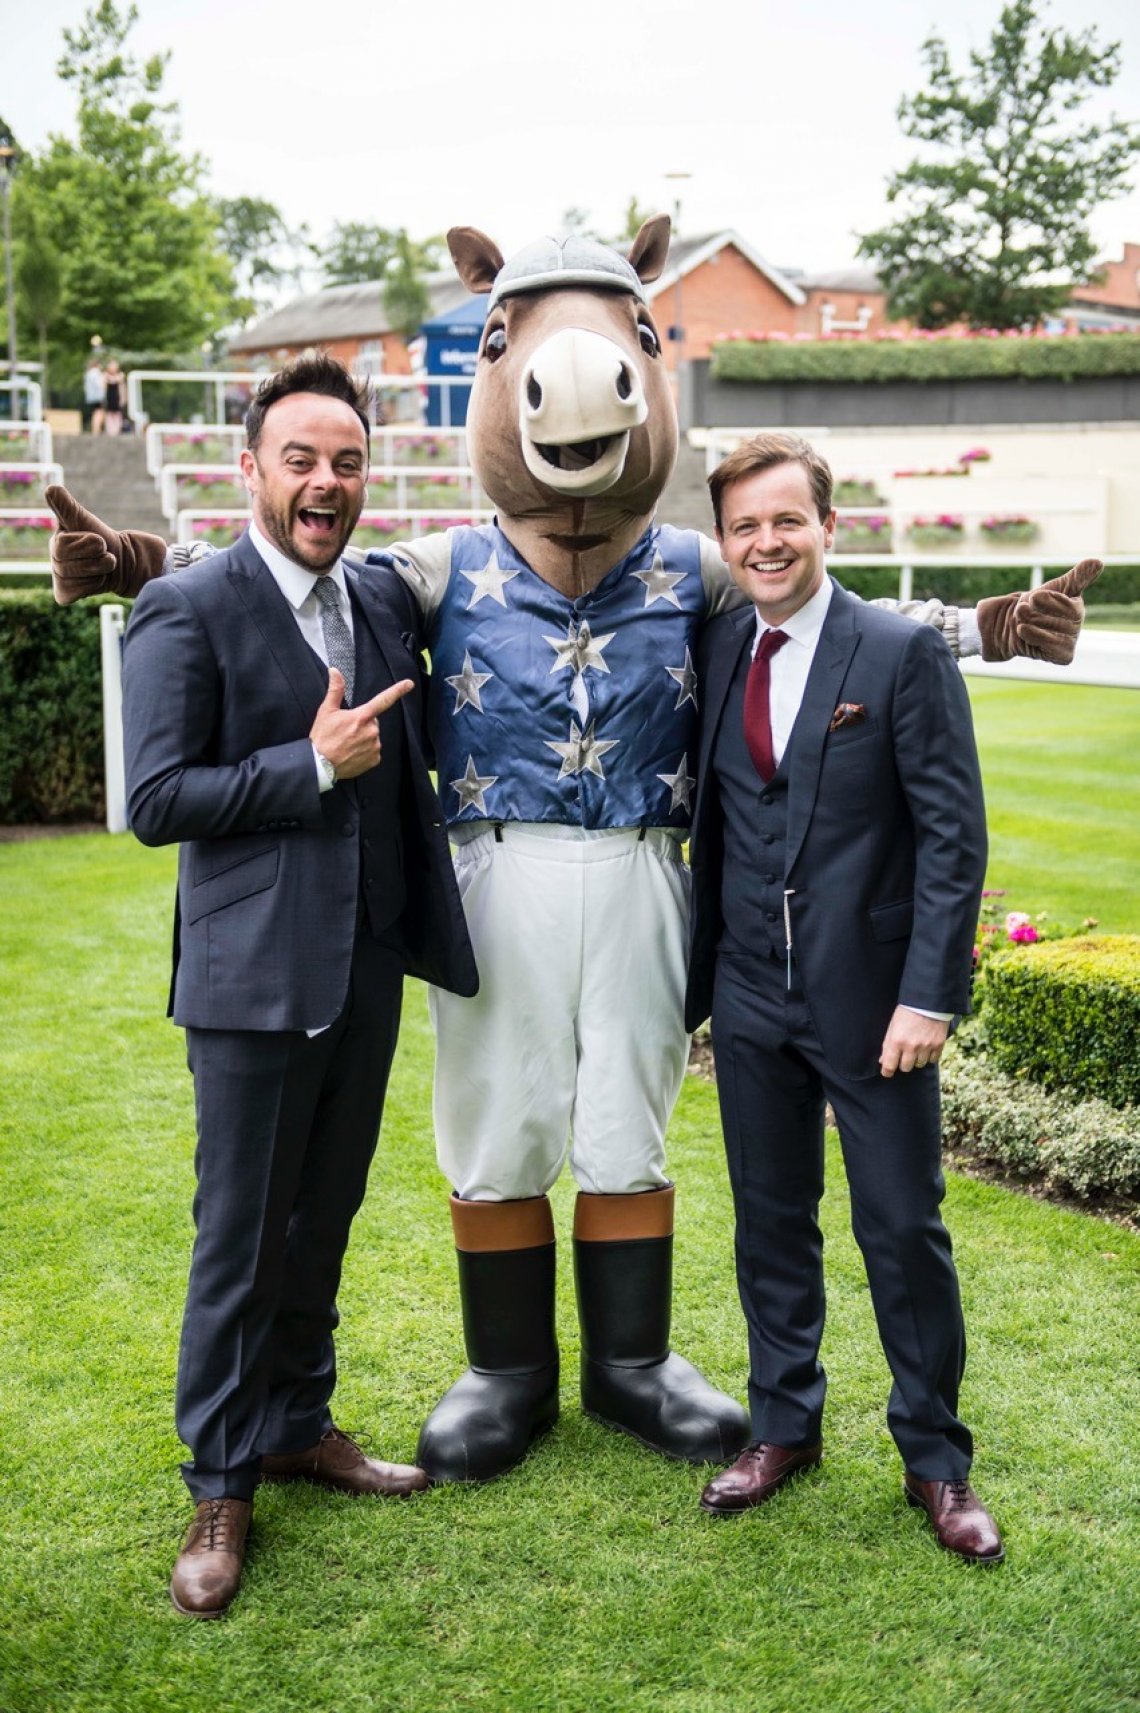 The kids of Colts & Fillies ask Ant & Dec! 